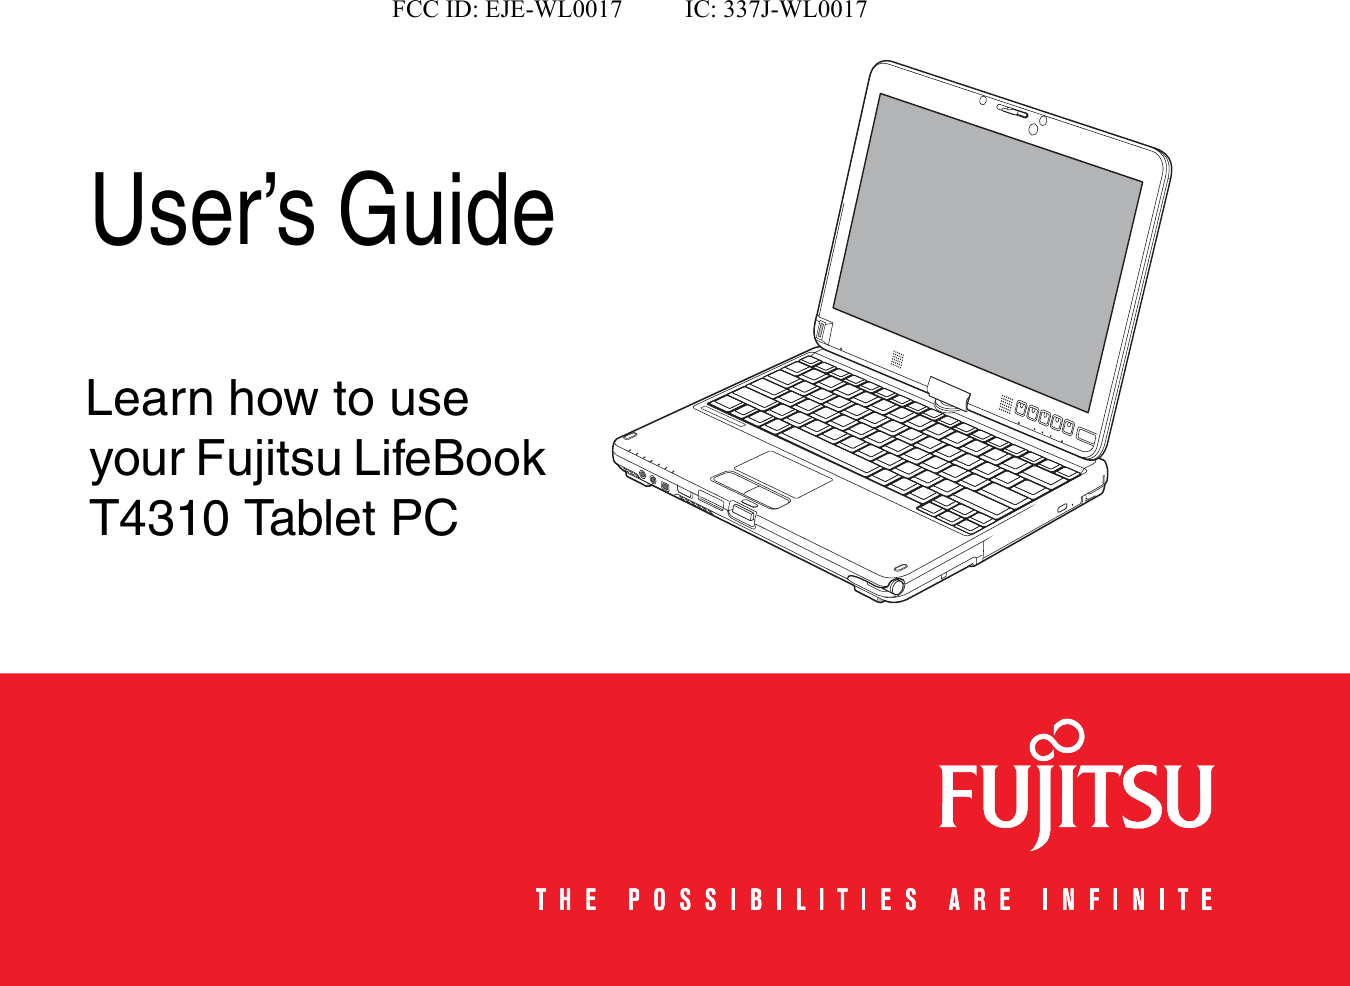                      FCC ID: EJE-WL0017          IC: 337J-WL0017 User’s GuideLearn how to use your Fujitsu LifeBook T410 Tablet PC